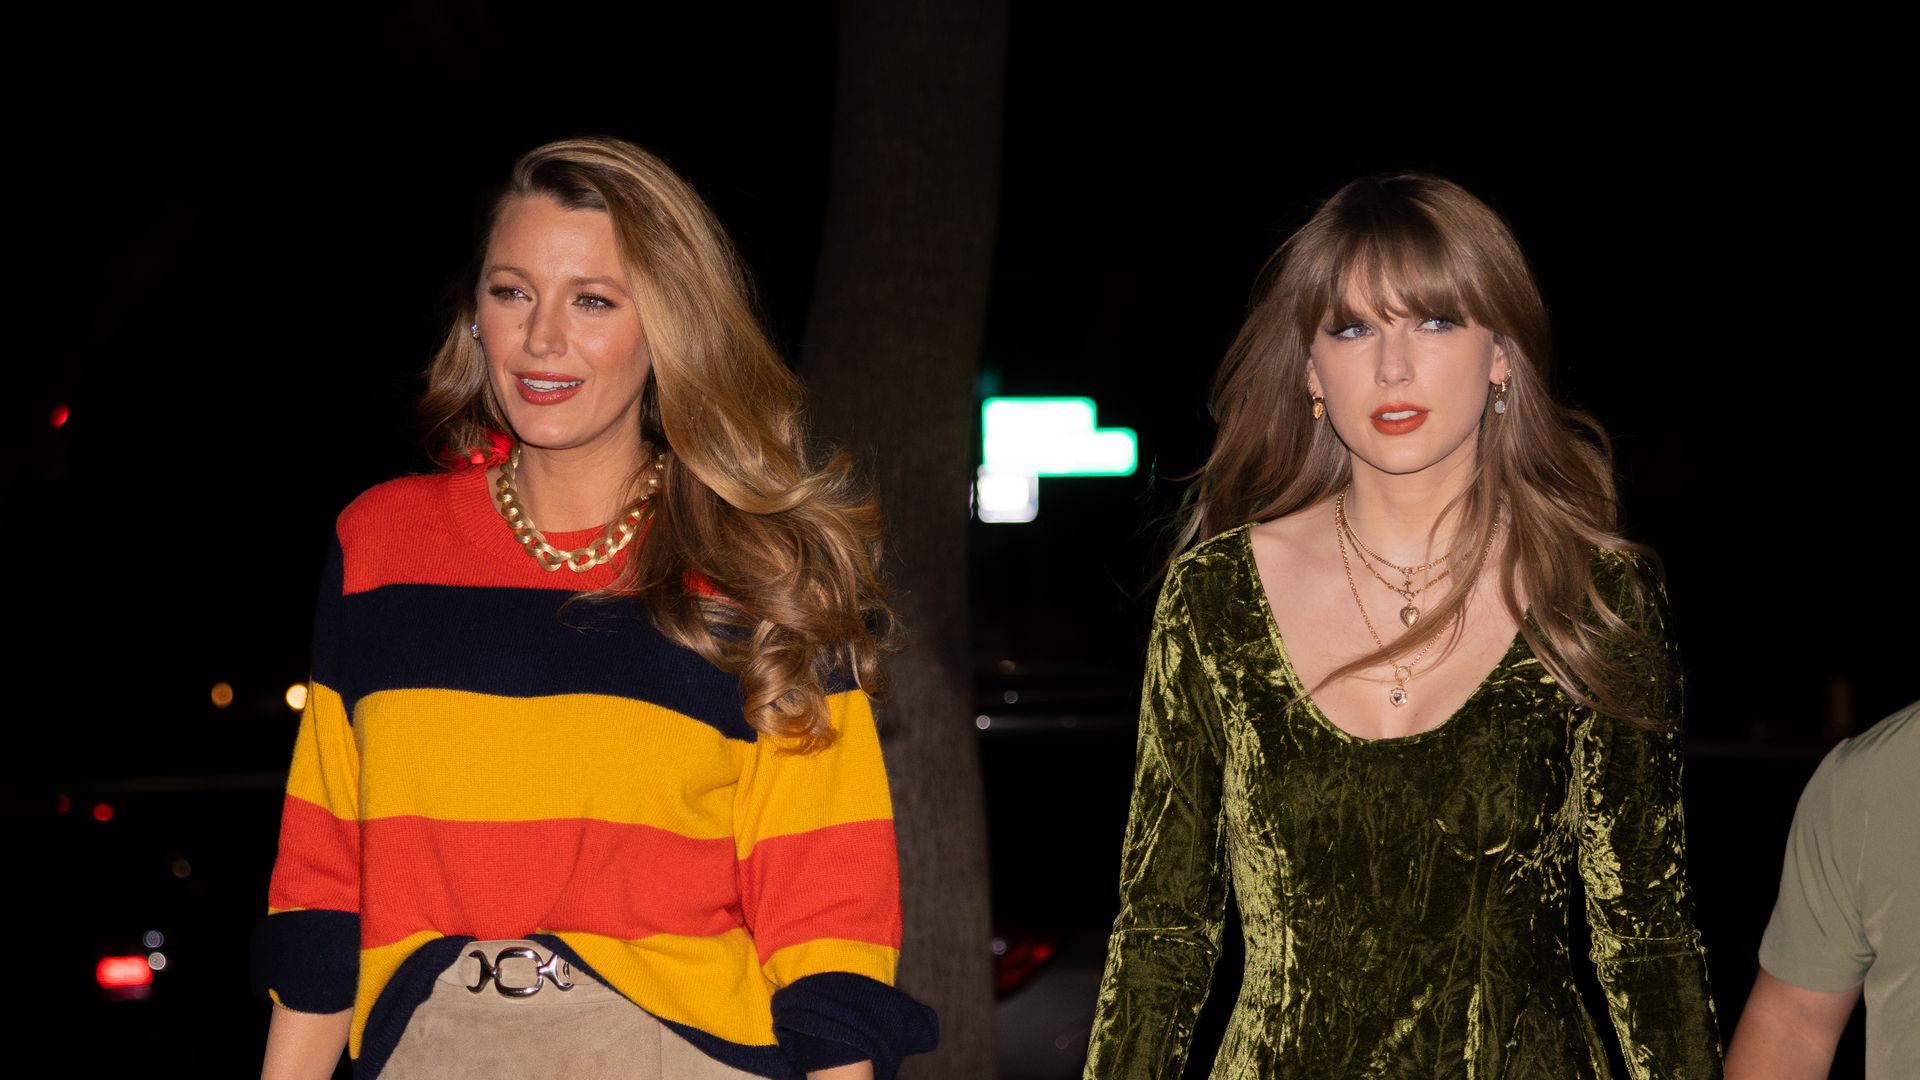 Taylor Swift and Blake Lively go out for dinner together in NYC